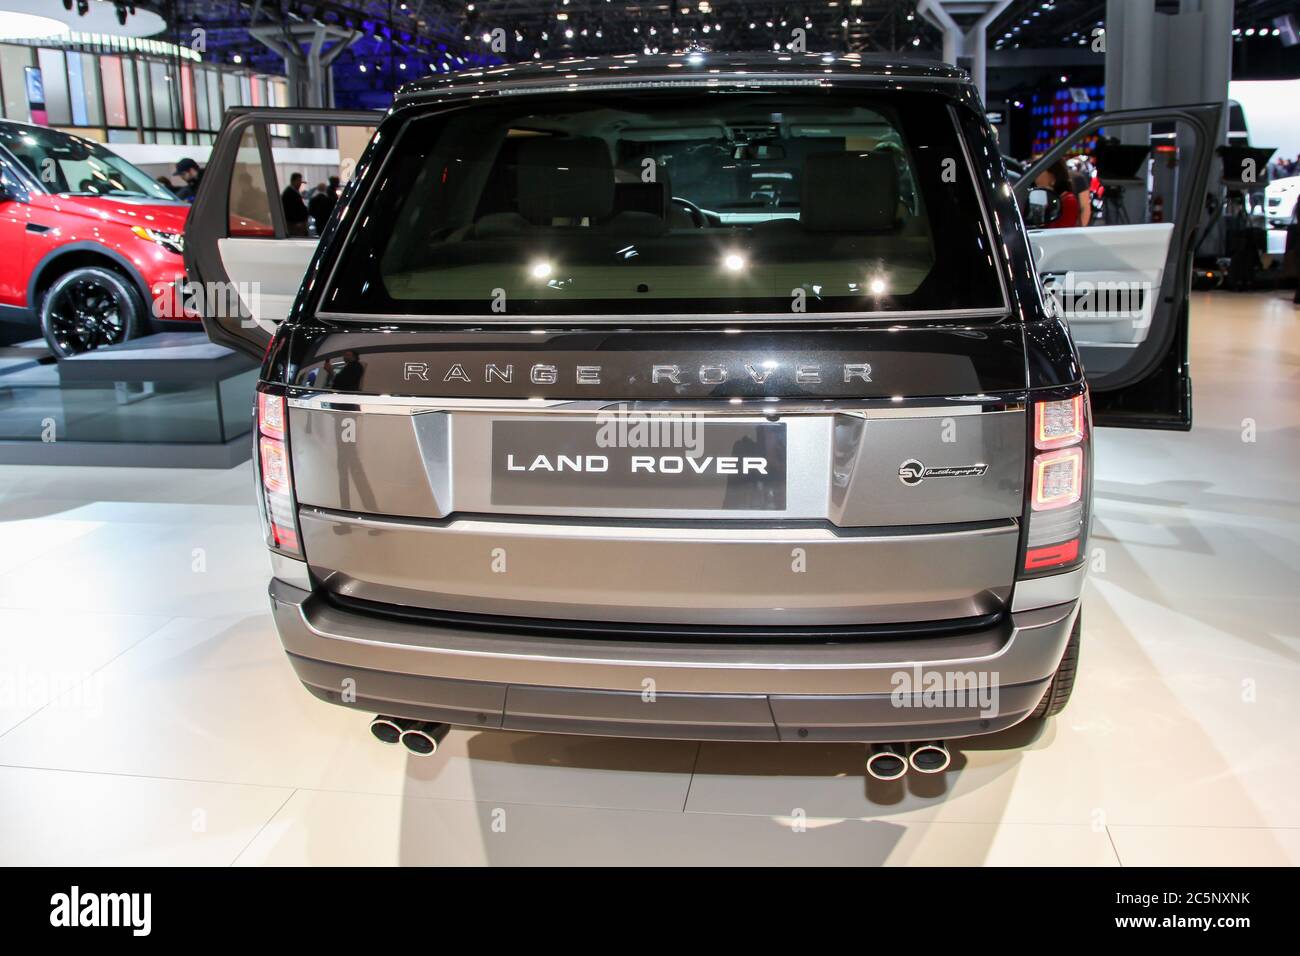 NEW YORK, NY - APRIL 1, 2015: Land Rover exhibit Range Rover at the 2015 New York International Auto Show during Press day Stock Photo